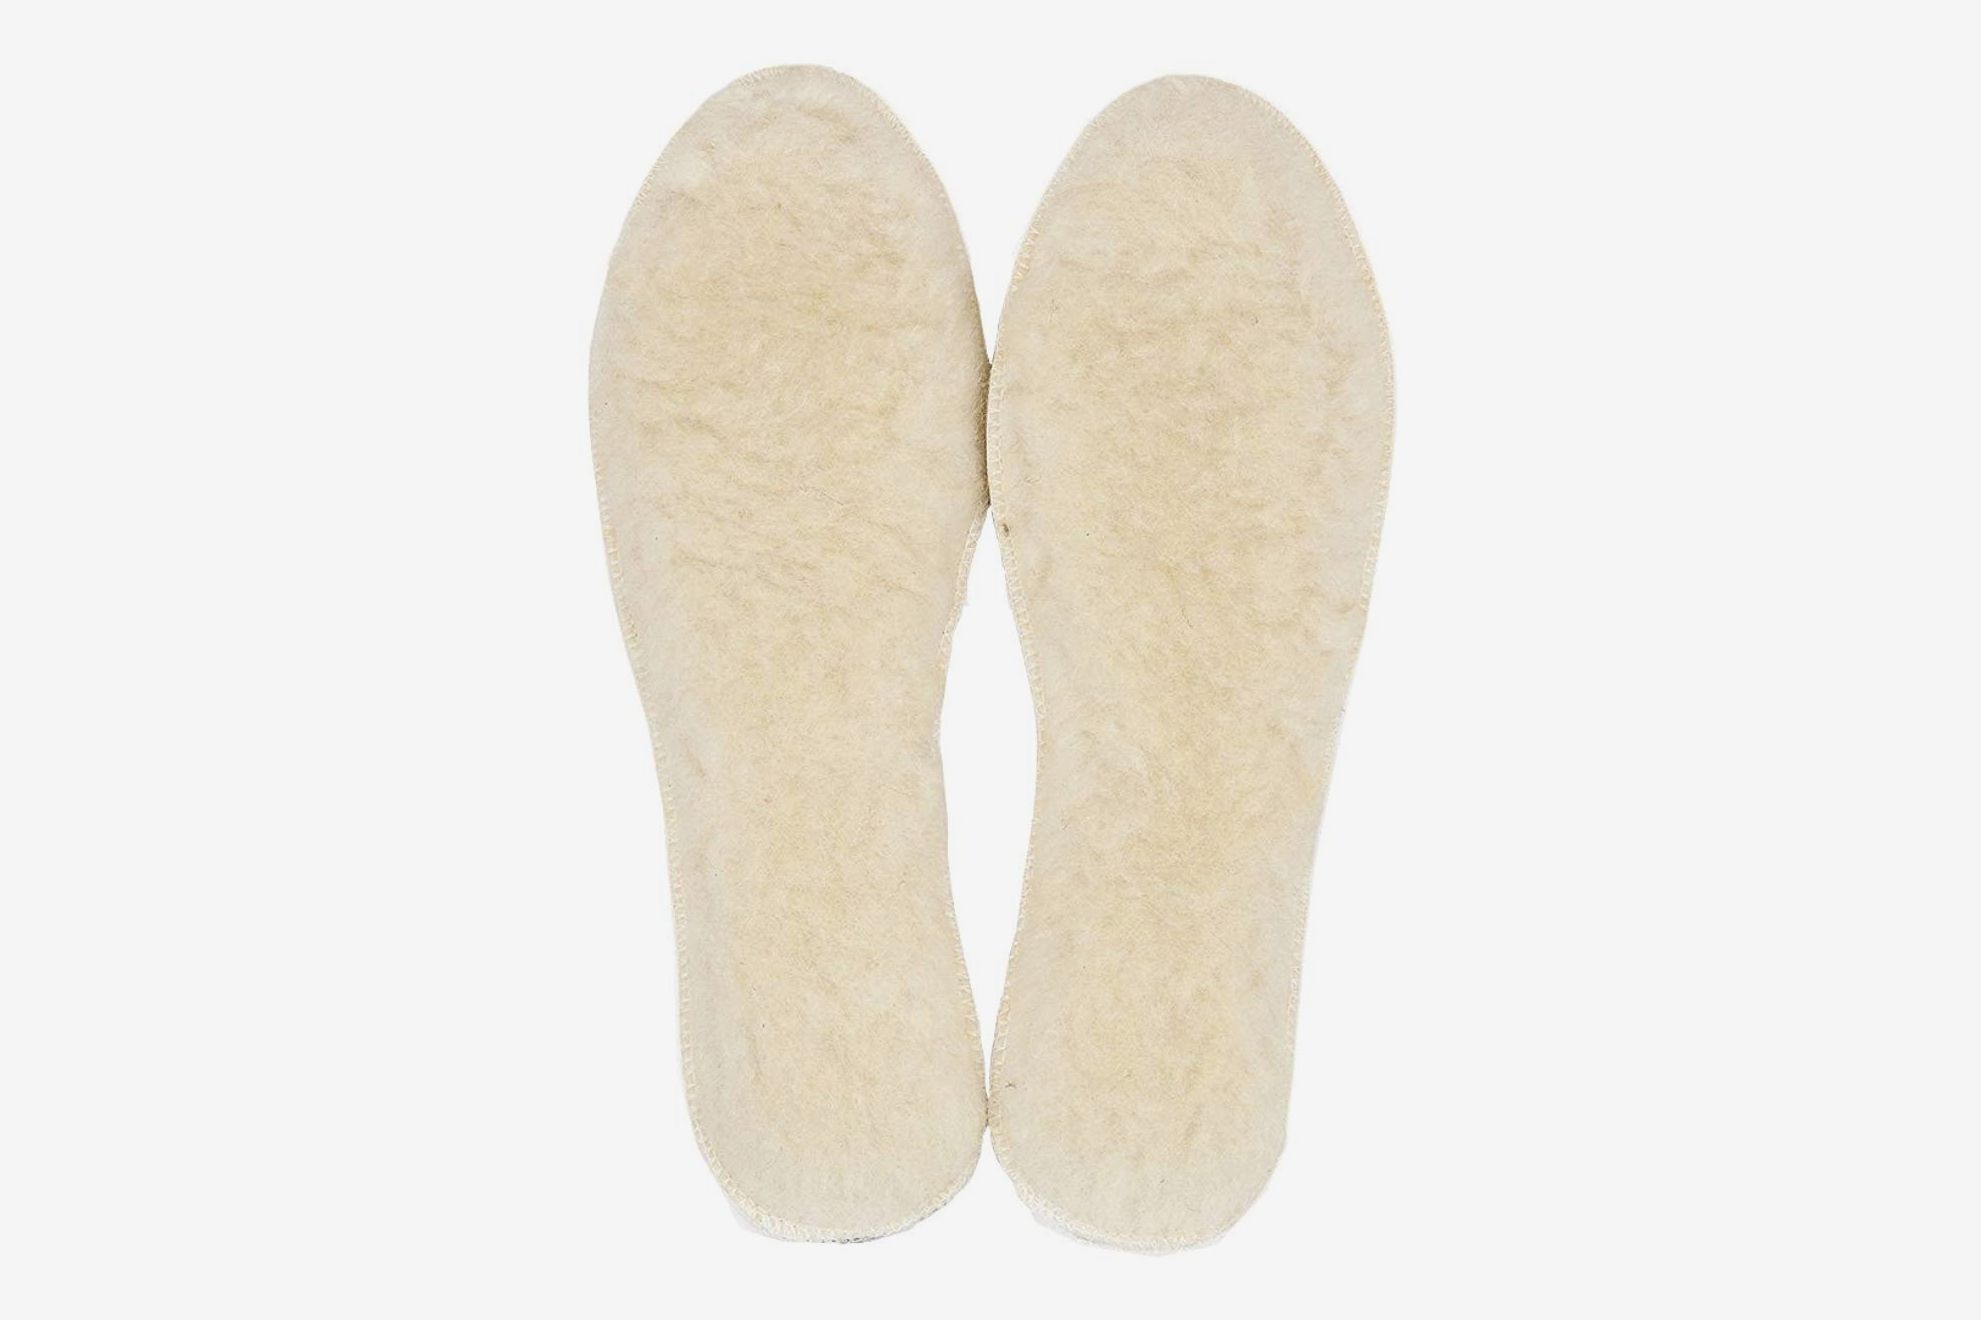 Merino Sheepskin Insoles Felt Thick Inner Soles Natural Wool for Shoes Boots!